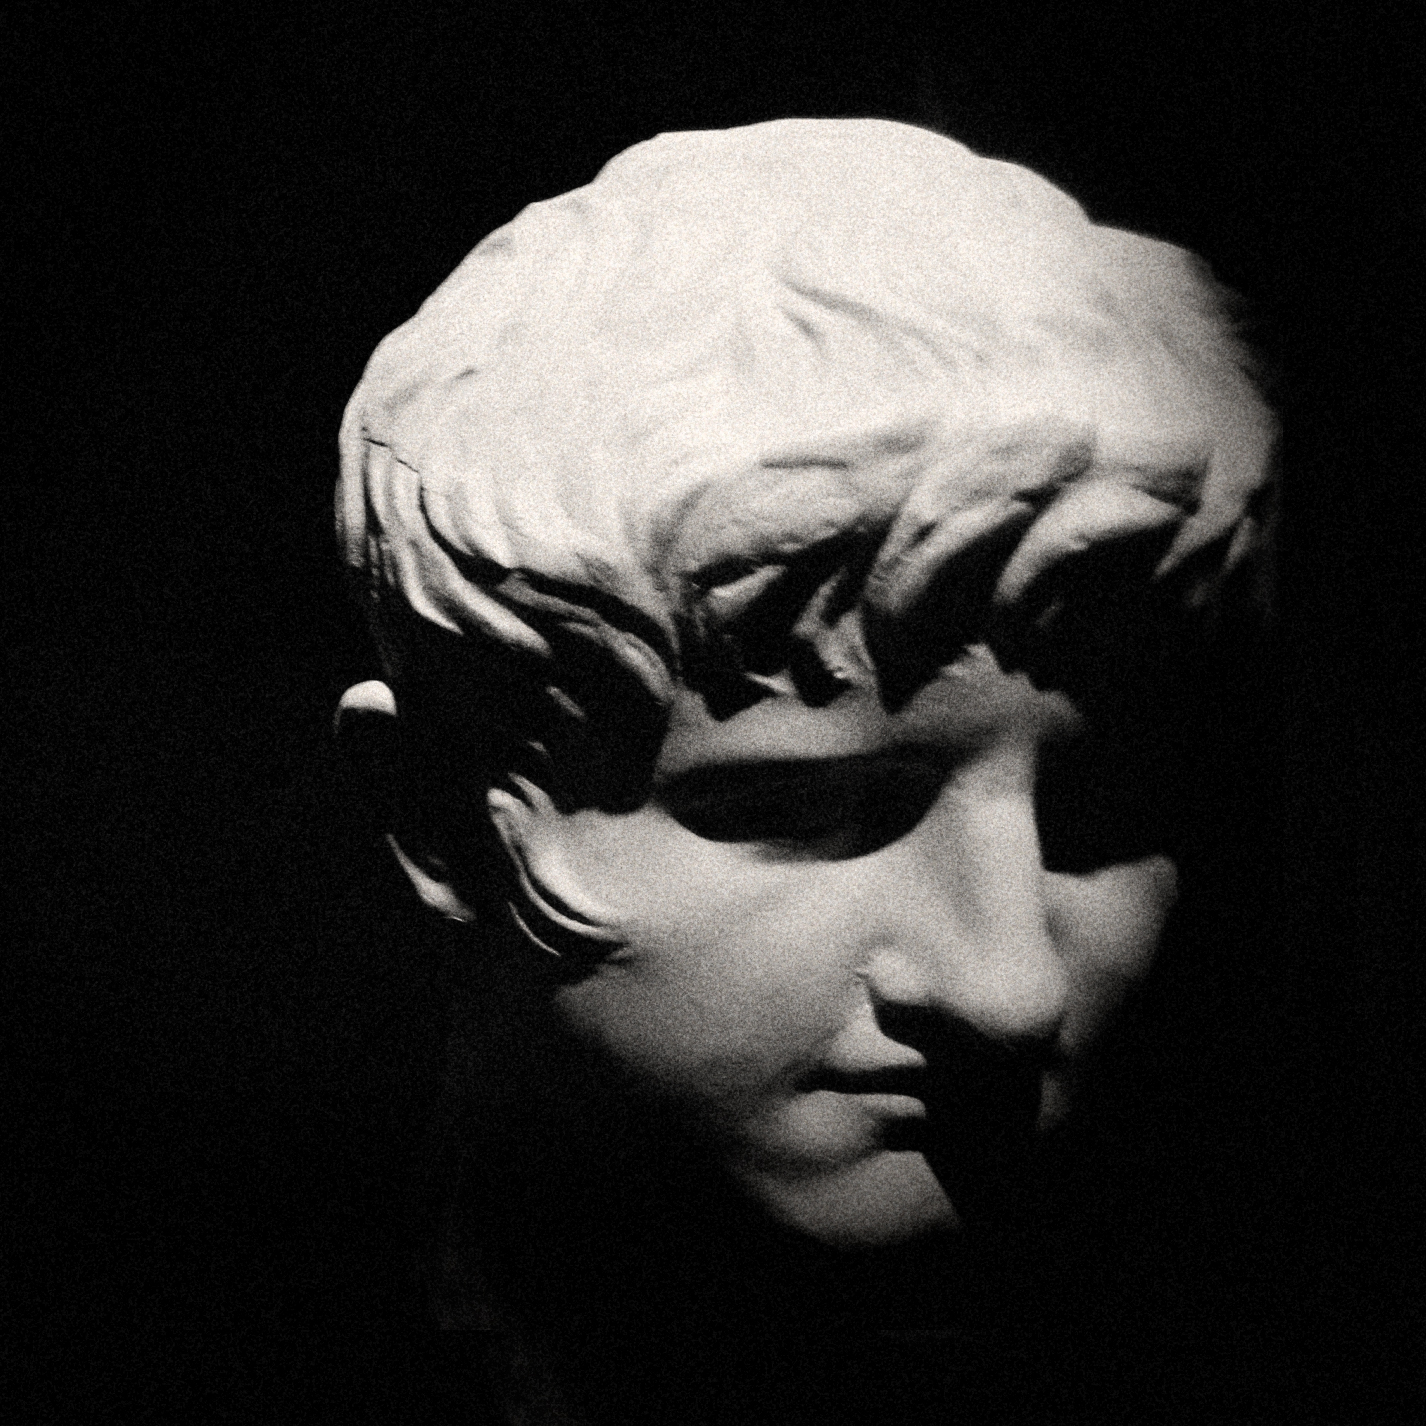 Head of Young Nero